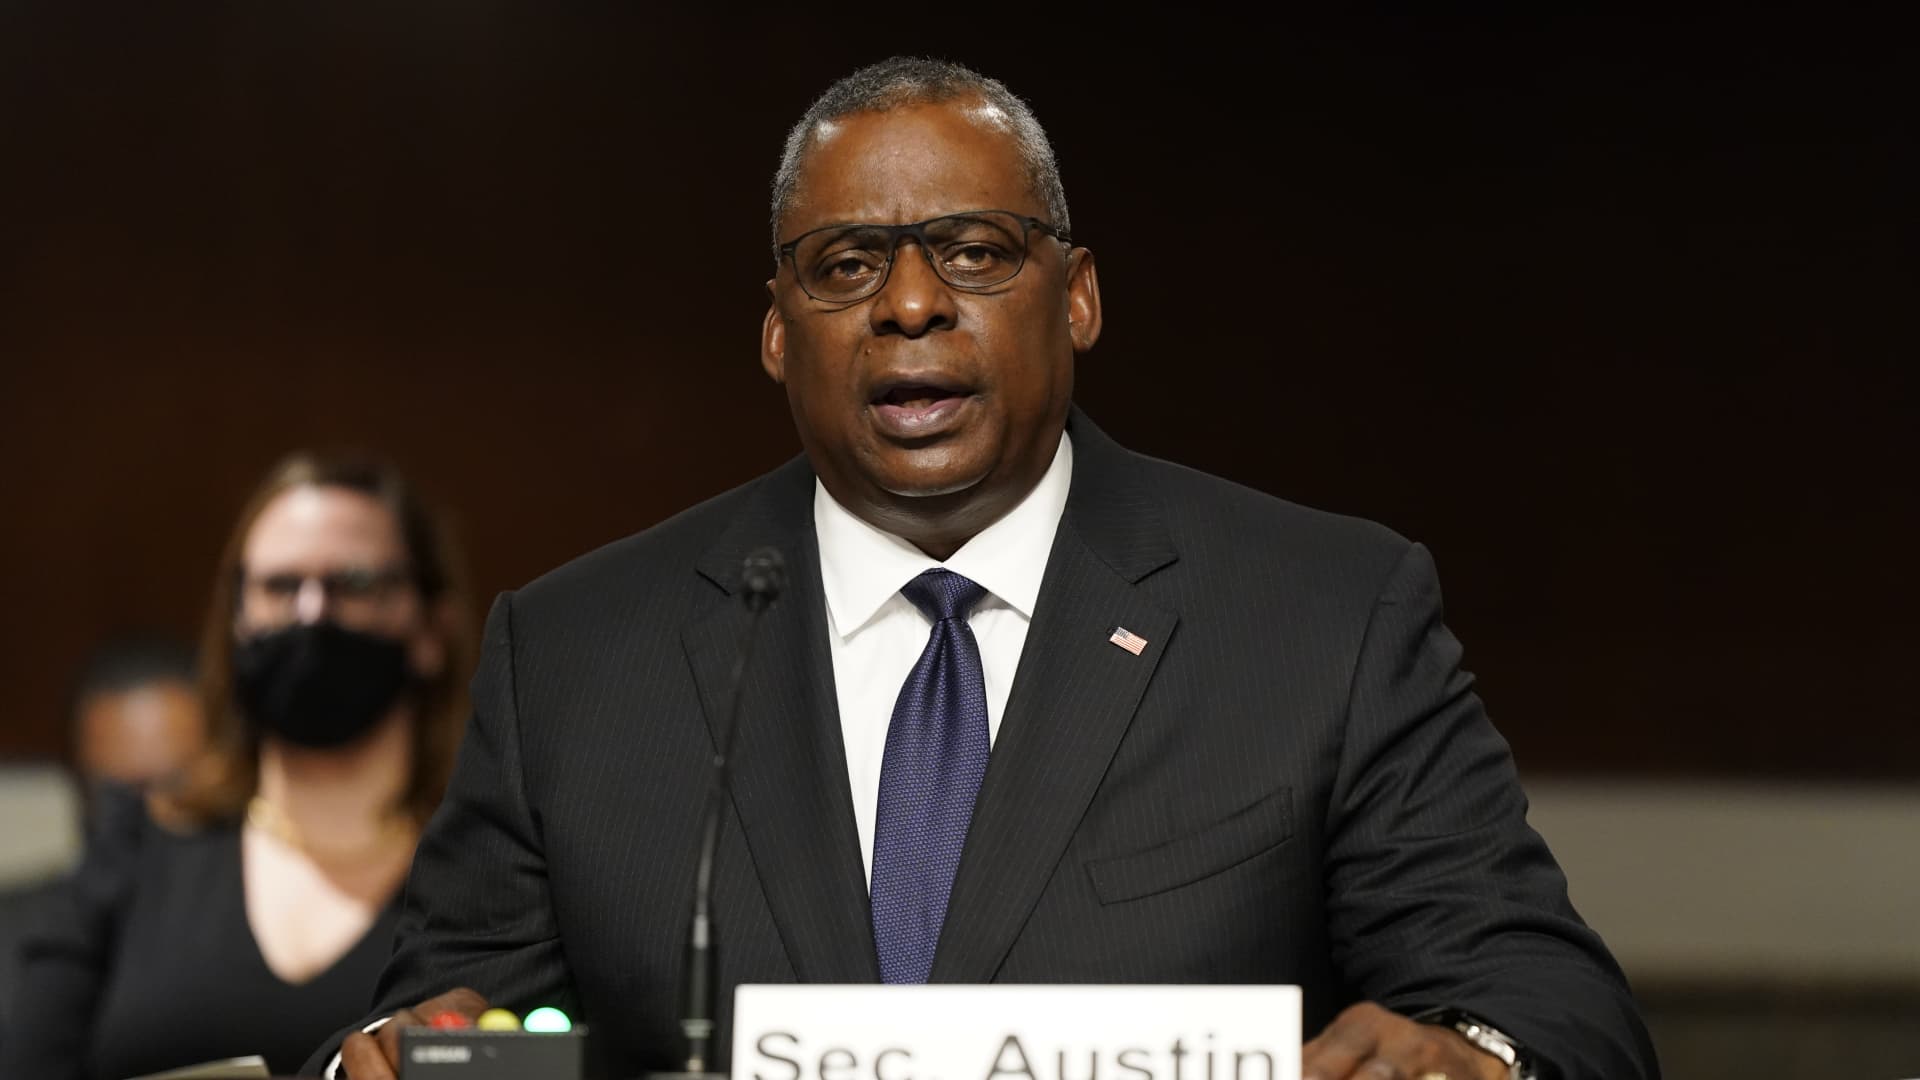 U.S. Secretary of Defense Lloyd Austin speaks during a Senate Armed Services Committee hearing on the conclusion of military operations in Afghanistan and plans for future counterterrorism operations on Capitol Hill on September 28, 2021 in Washington, DC.